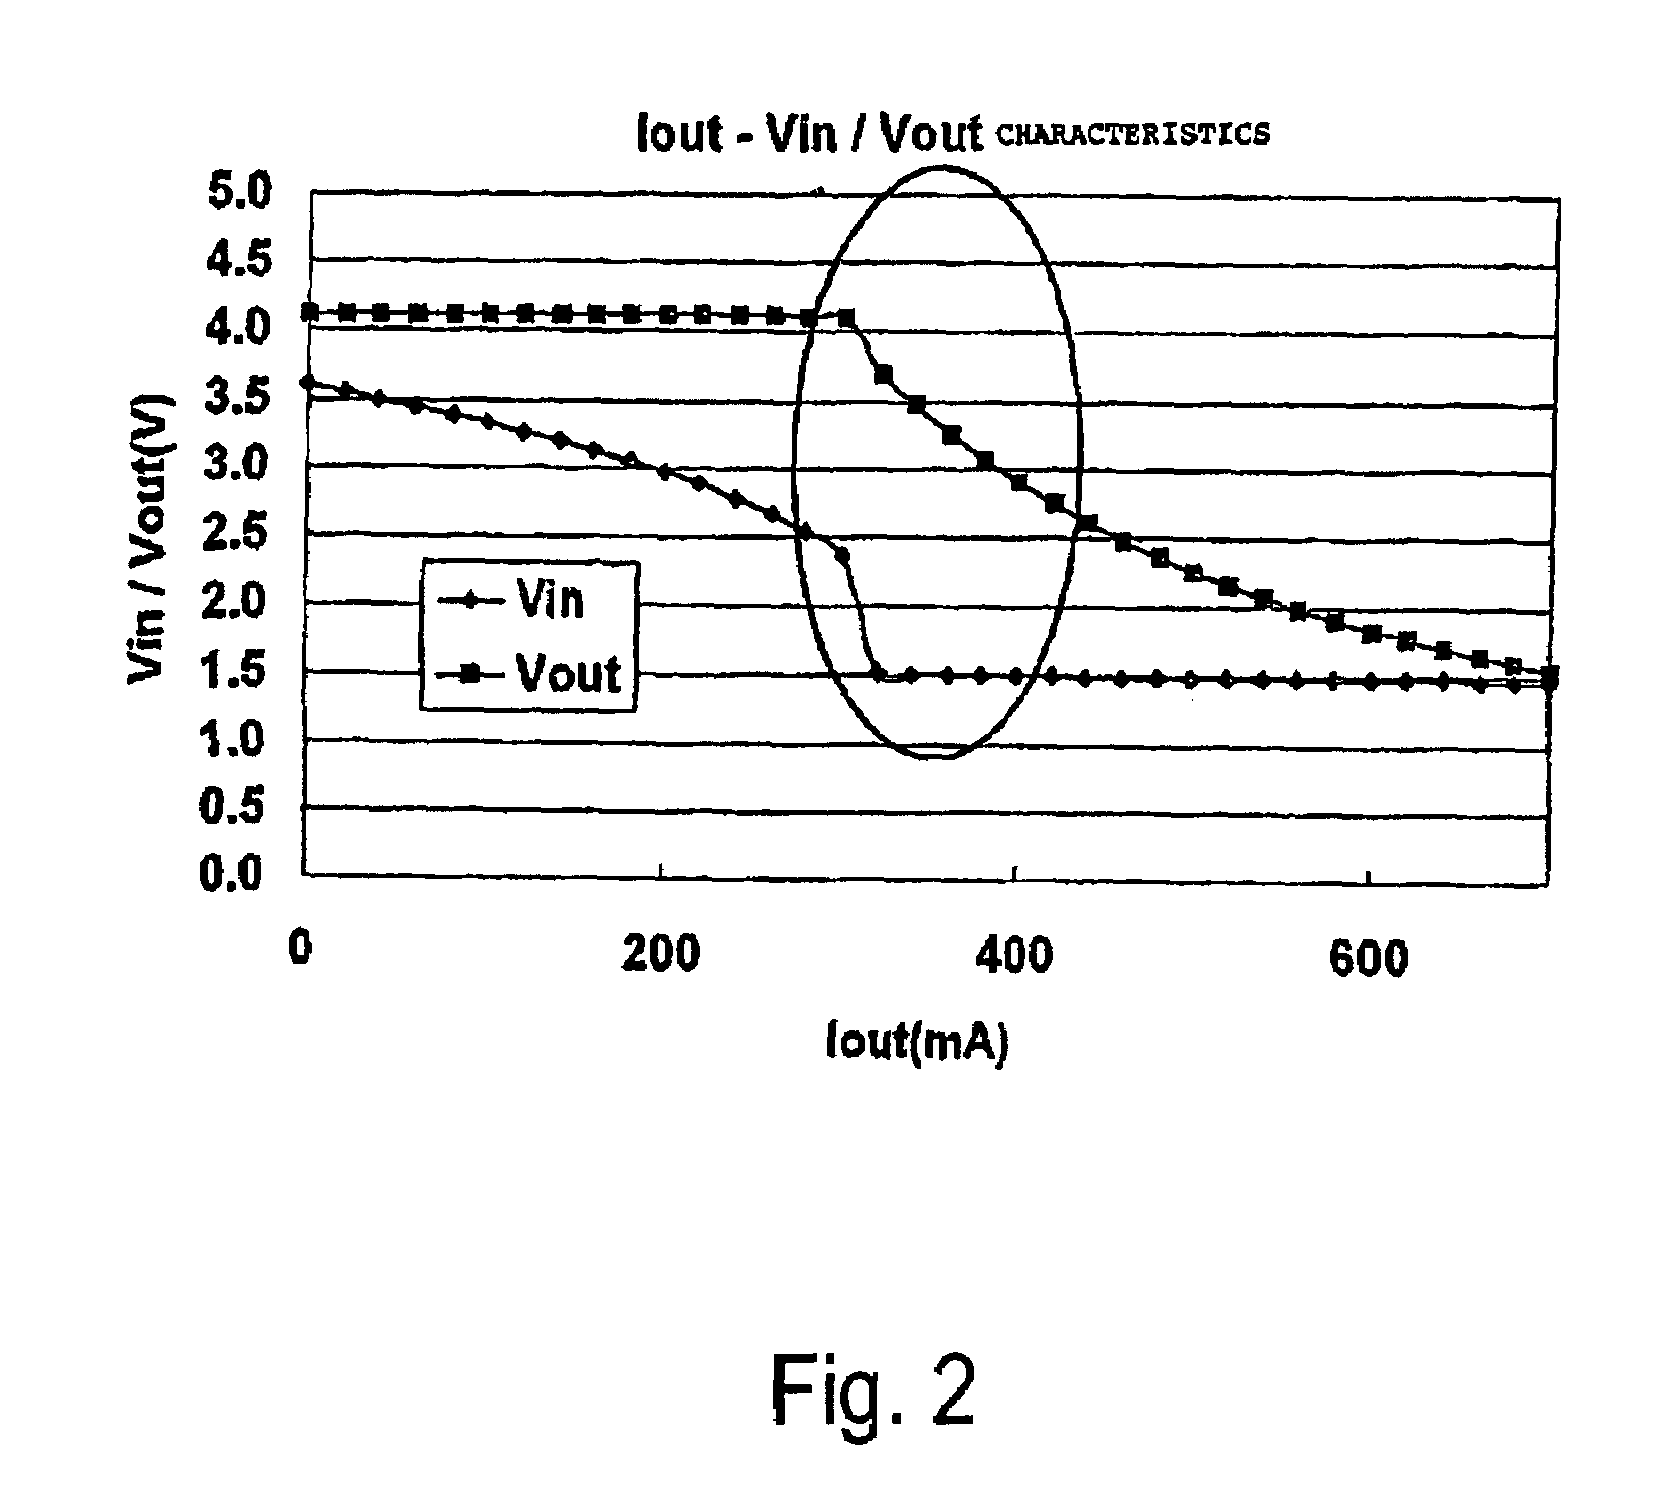 Output regulating device for regulating output of electric power source depending on input therefrom